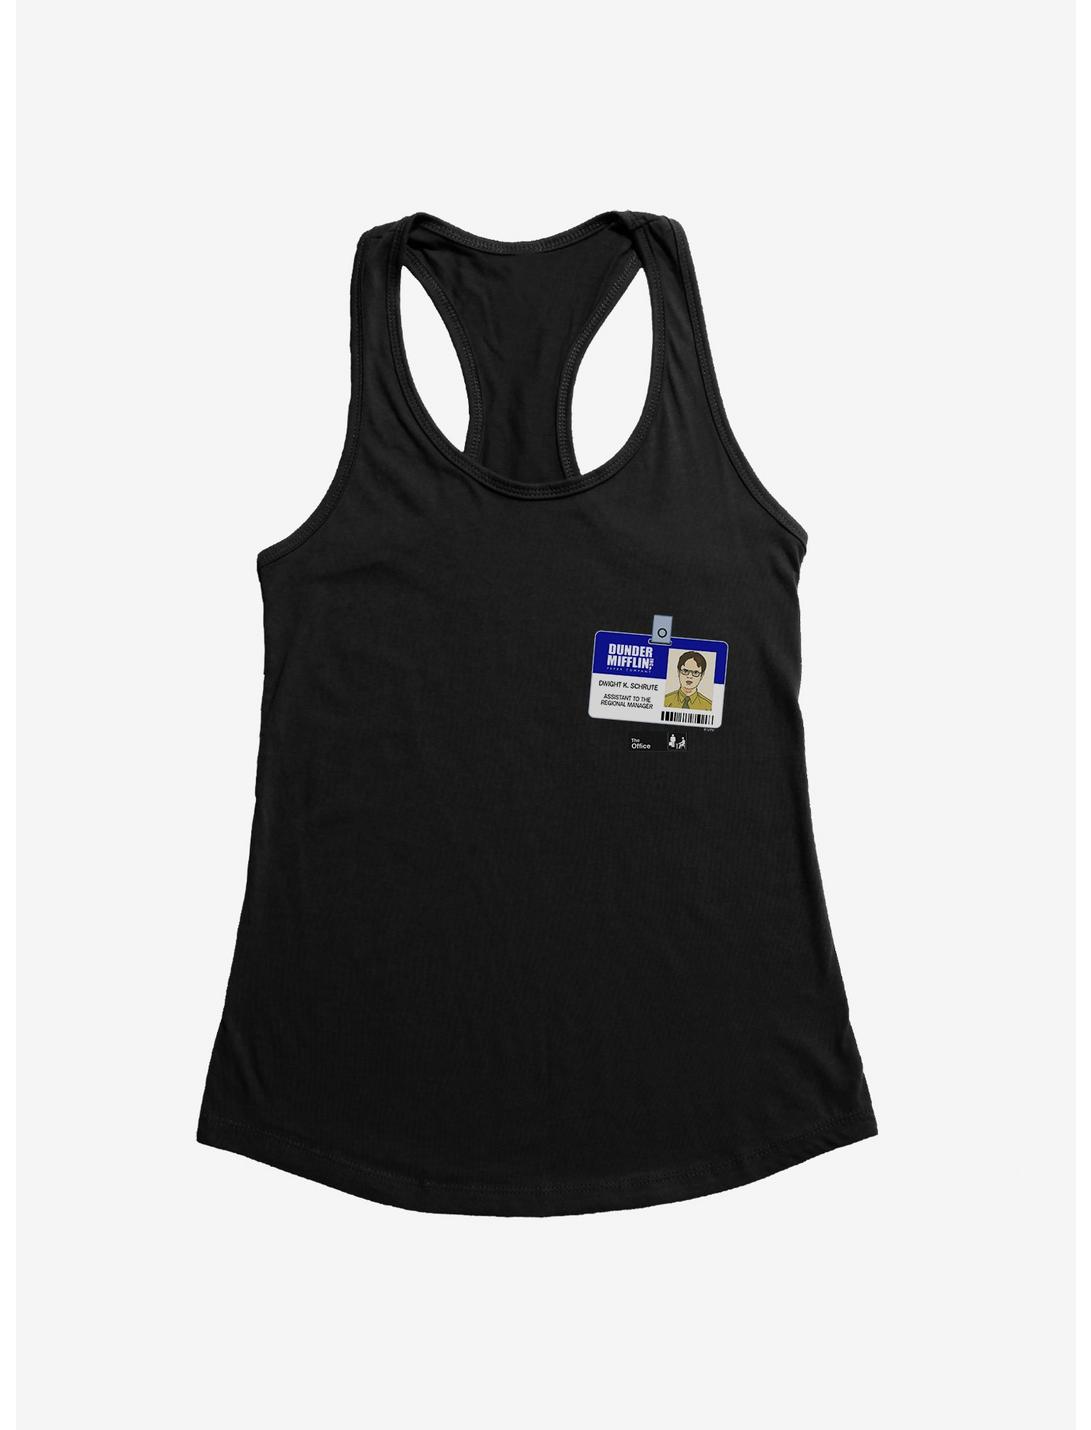 The Office Dwight Badge Girls Tank, , hi-res